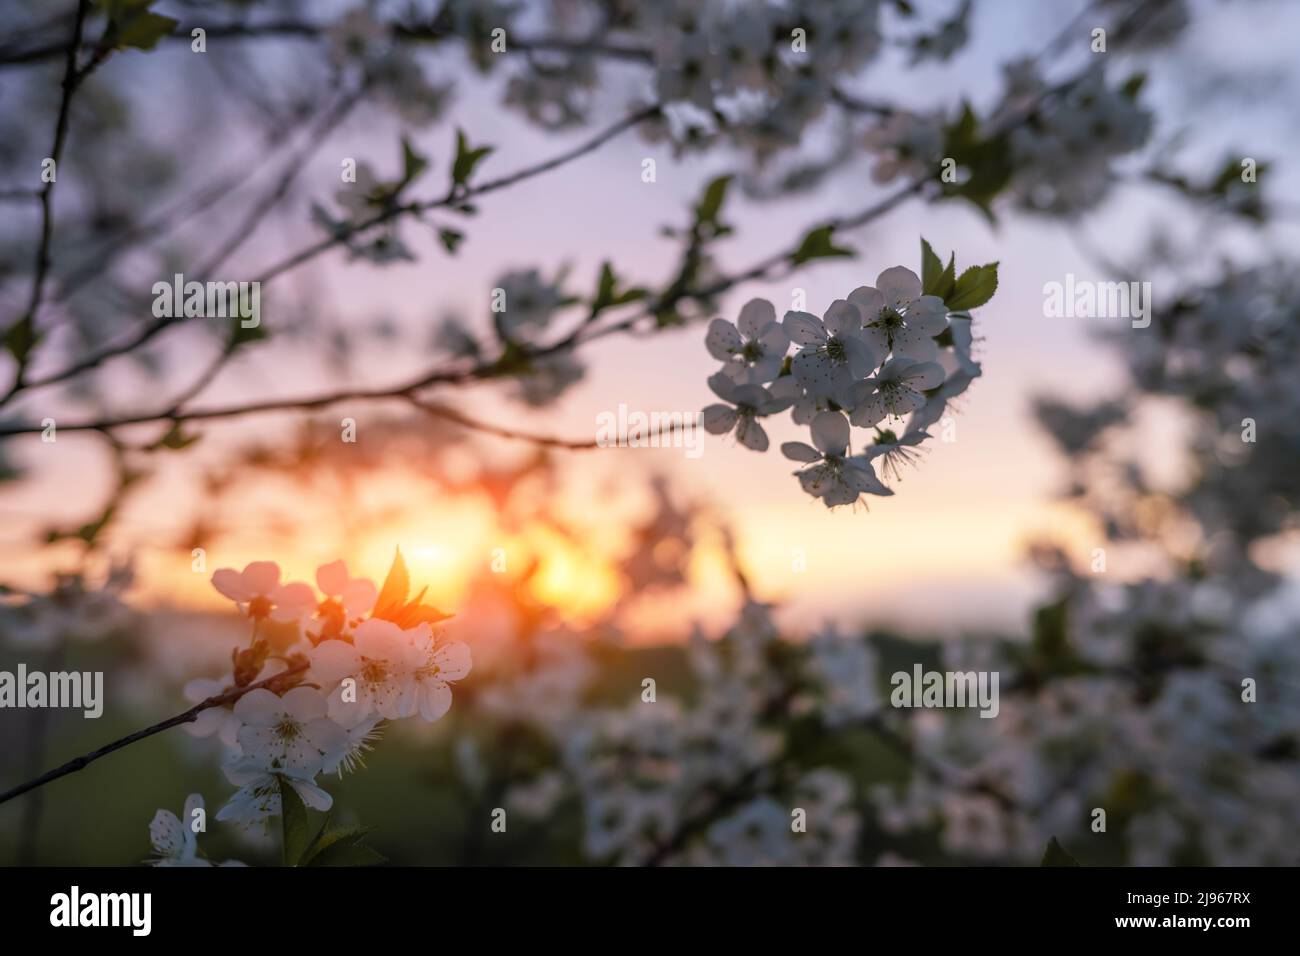 Cherry branch with flowers blossoms at sunset. Nature spring background Stock Photo